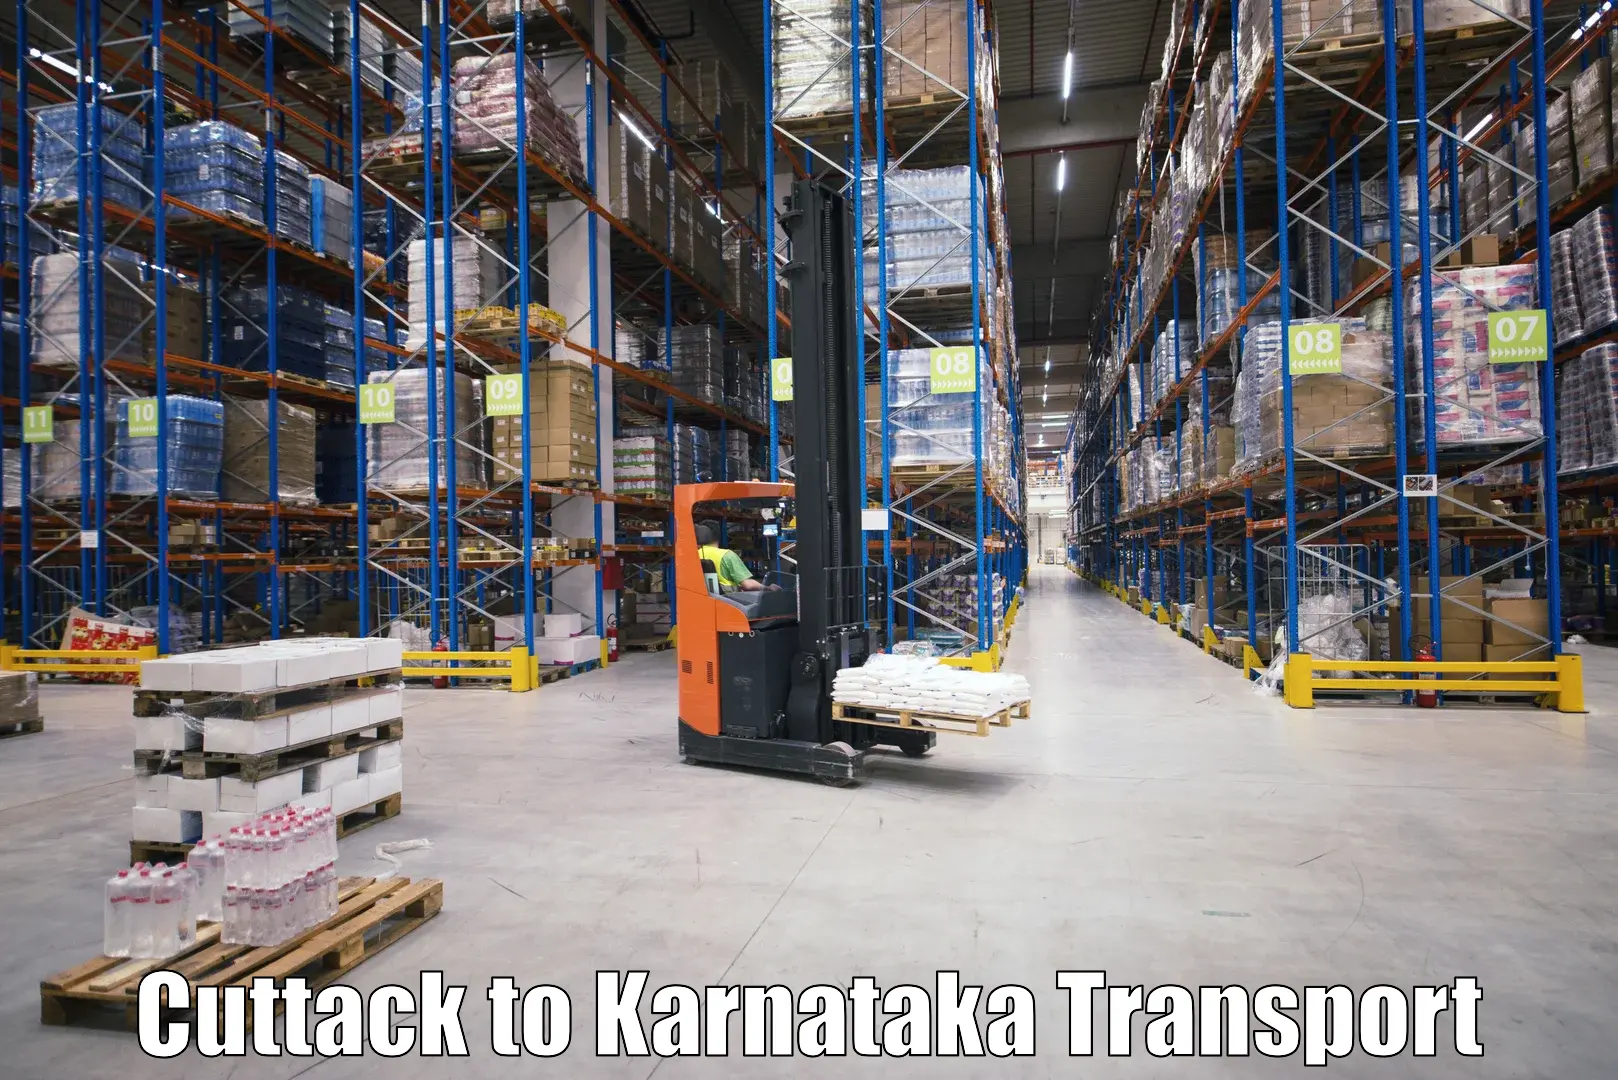 Transport bike from one state to another Cuttack to Karnataka